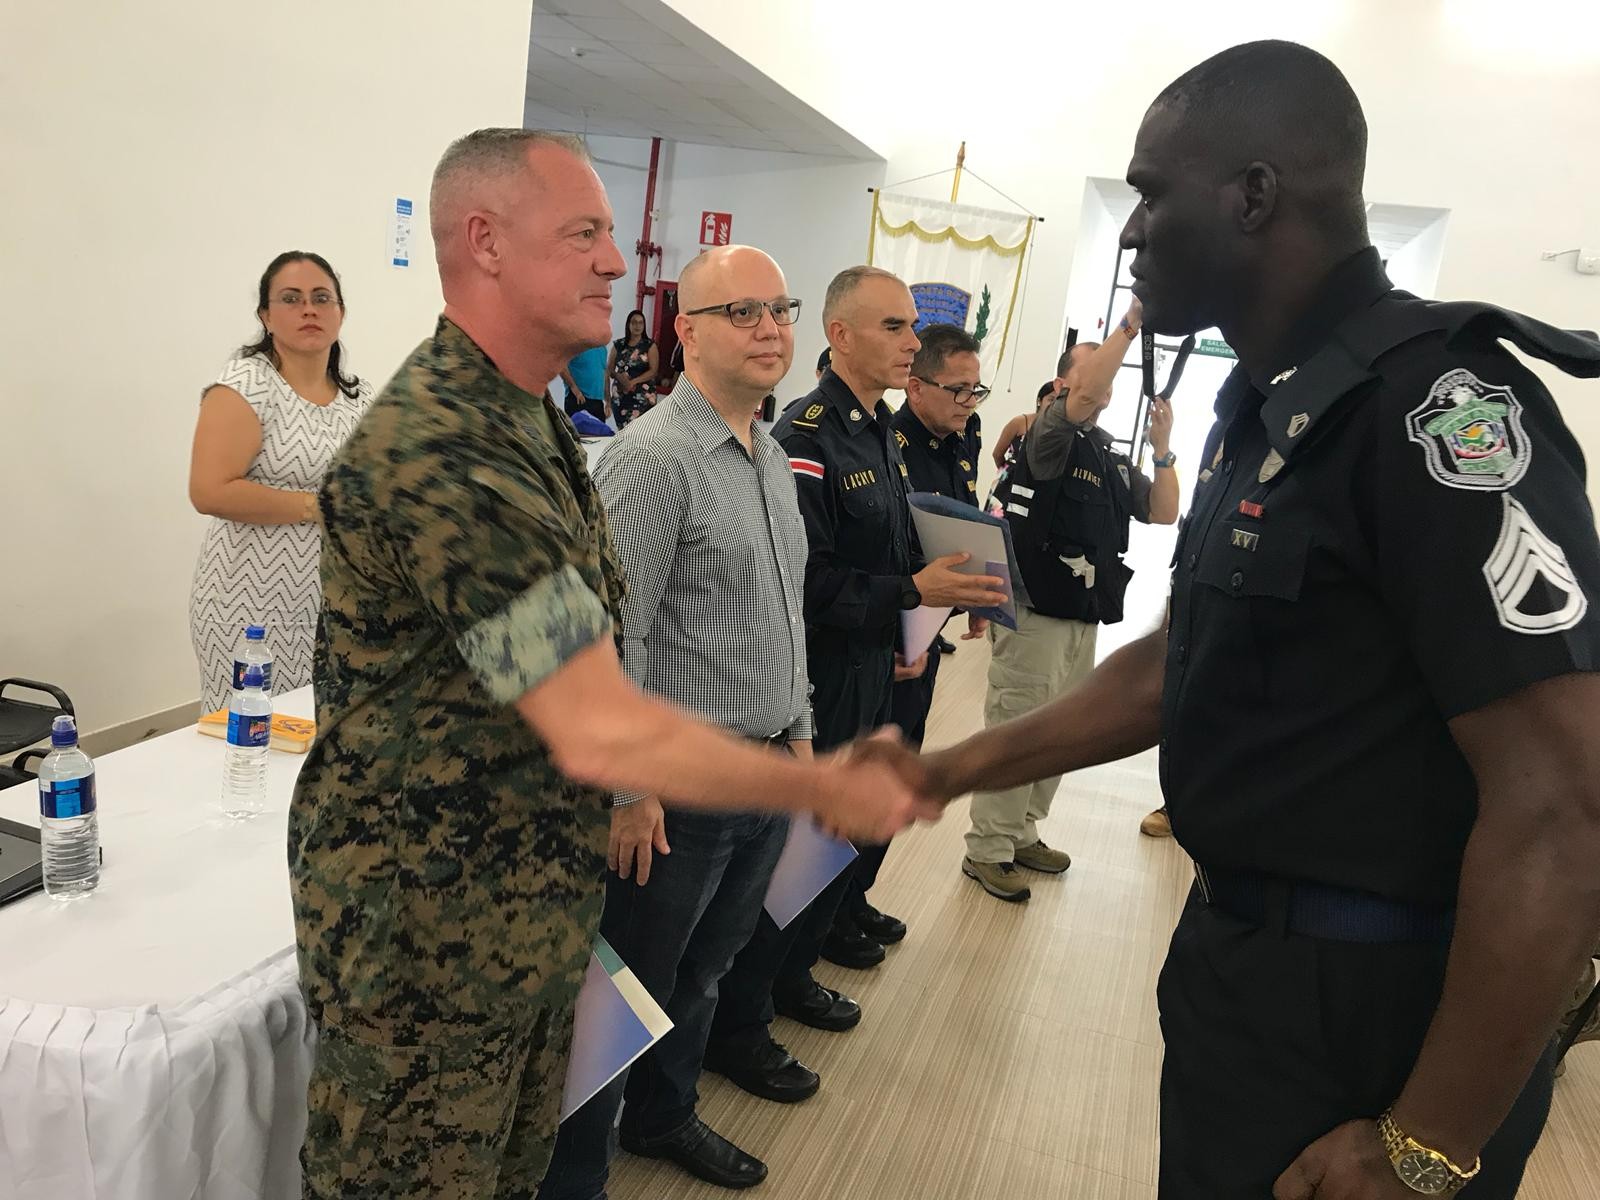 U.S. service members converge in Costa Rica for a trilateral leadership exchange | Article | The United States Army